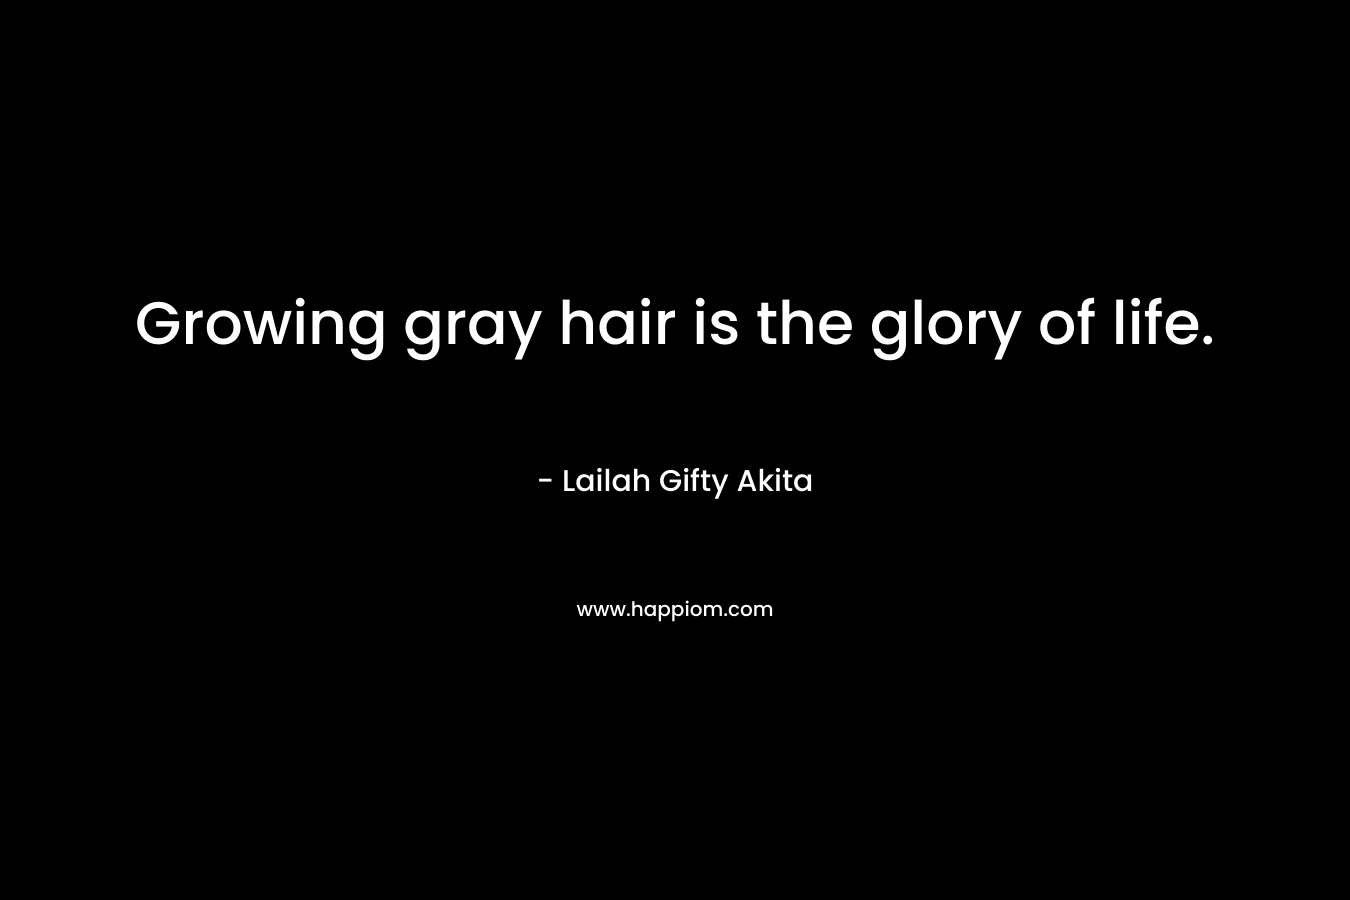 Growing gray hair is the glory of life.